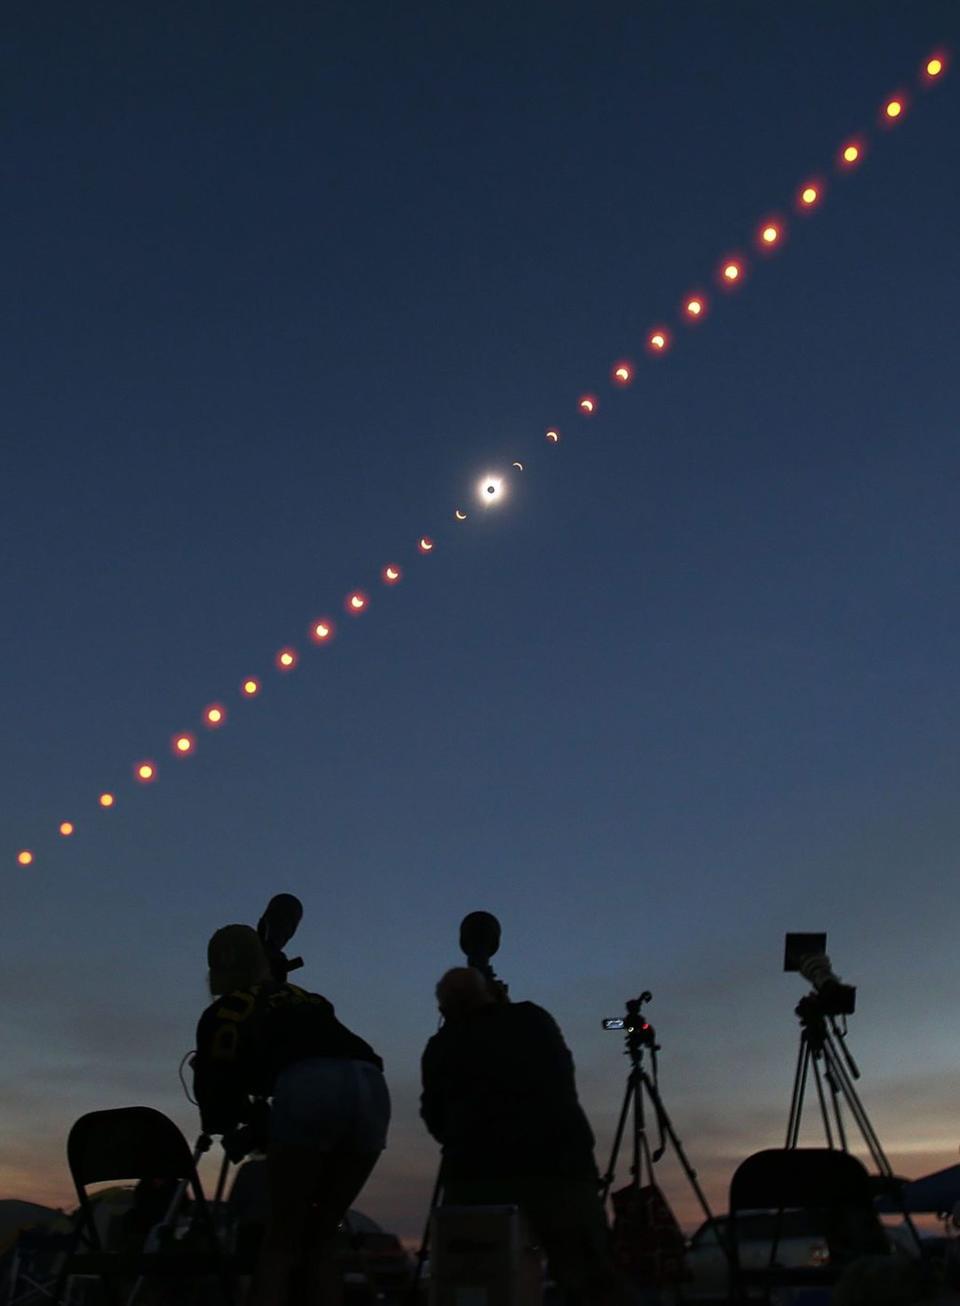 Photographers make images of the 2017 total eclipse over Madras in this four hour time-lapse composite image.